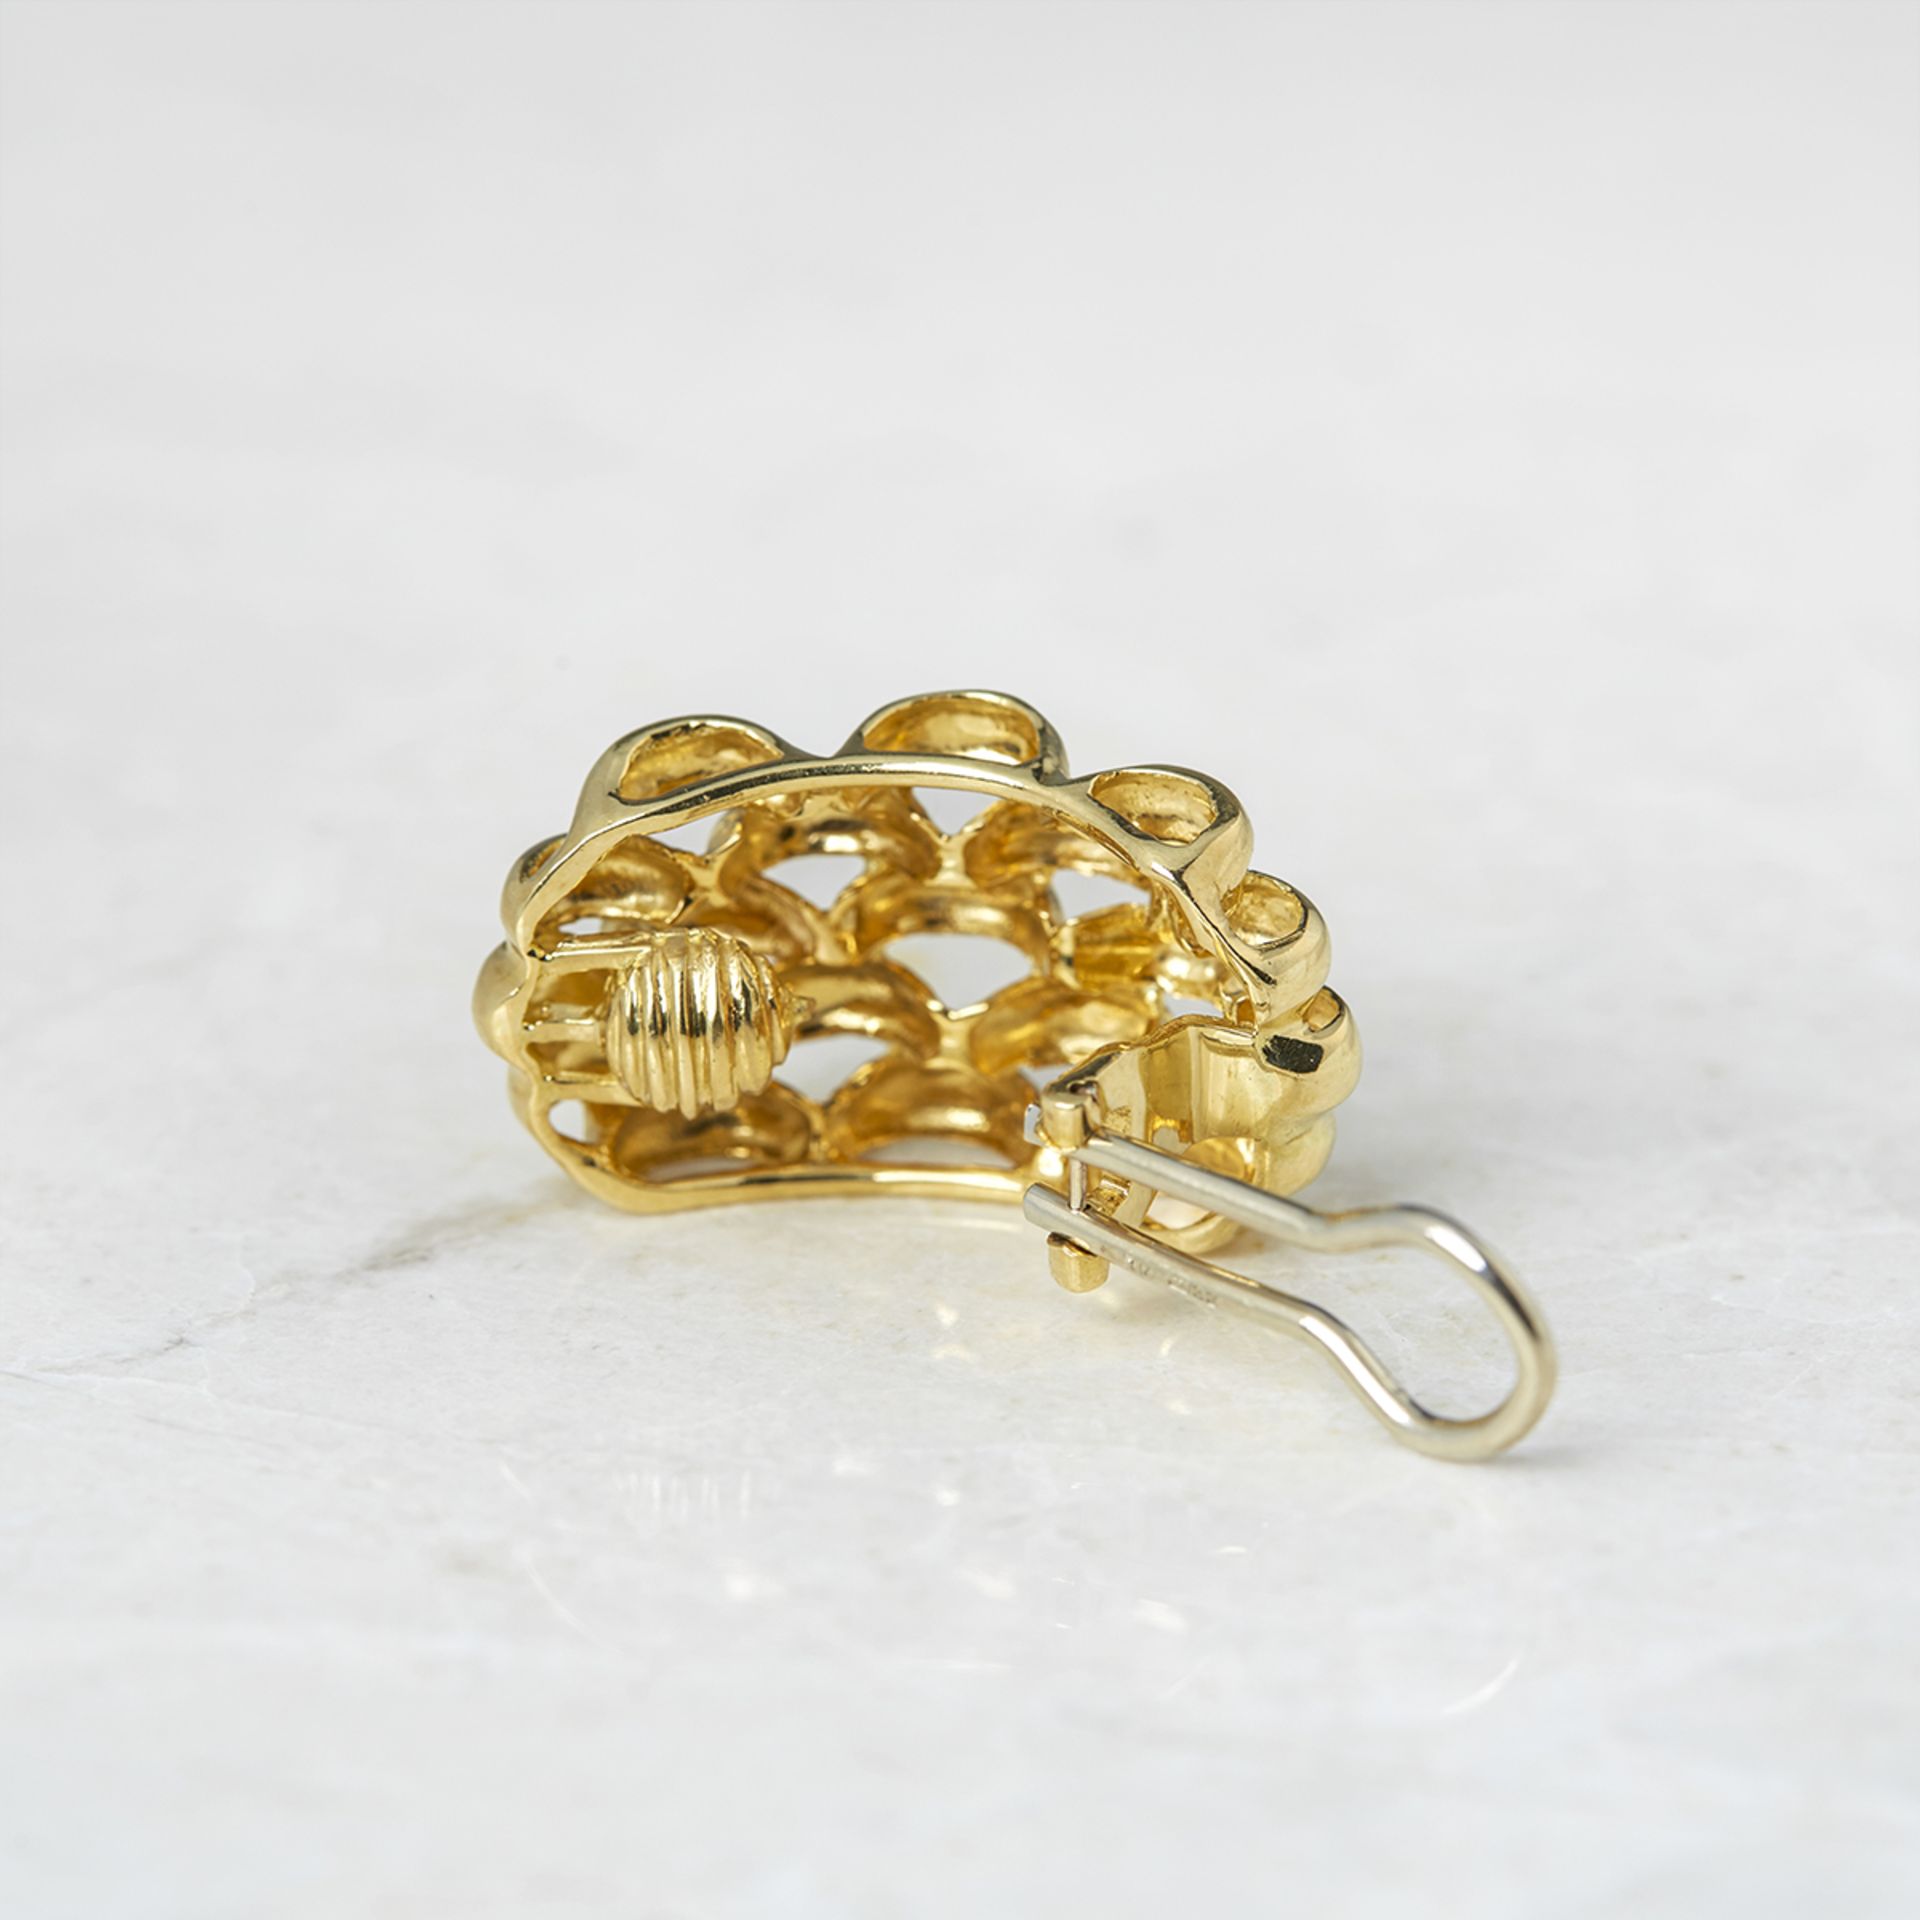 David Morris, 18k Yellow Gold Honeycomb Clip On Earrings - Image 5 of 6